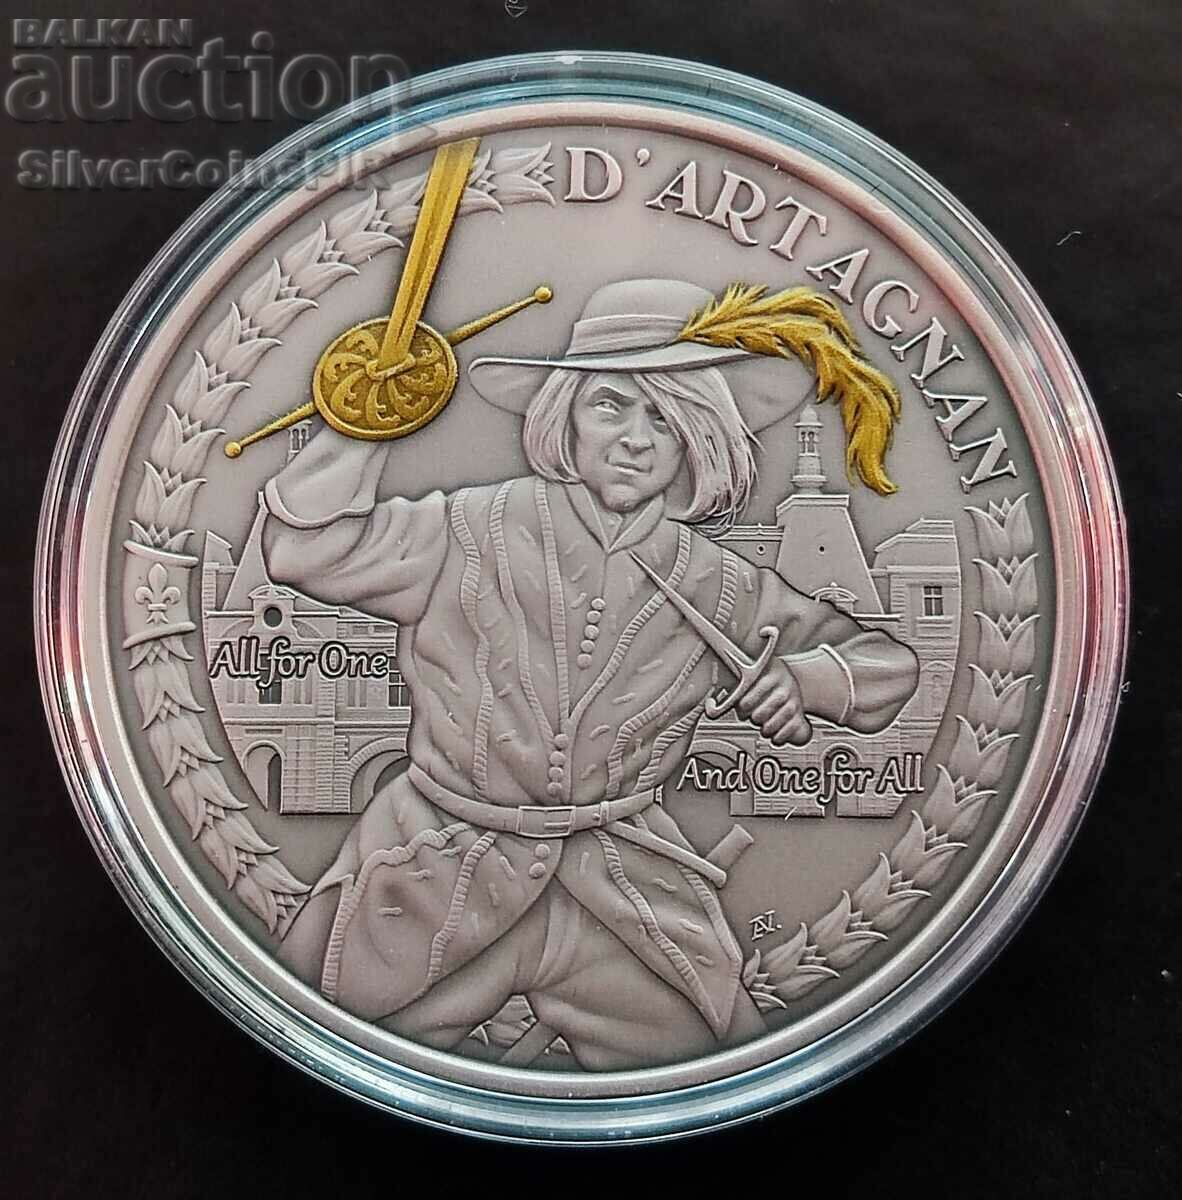 Silver 1 Oz D'Artagnan The Three Musketeers 2021